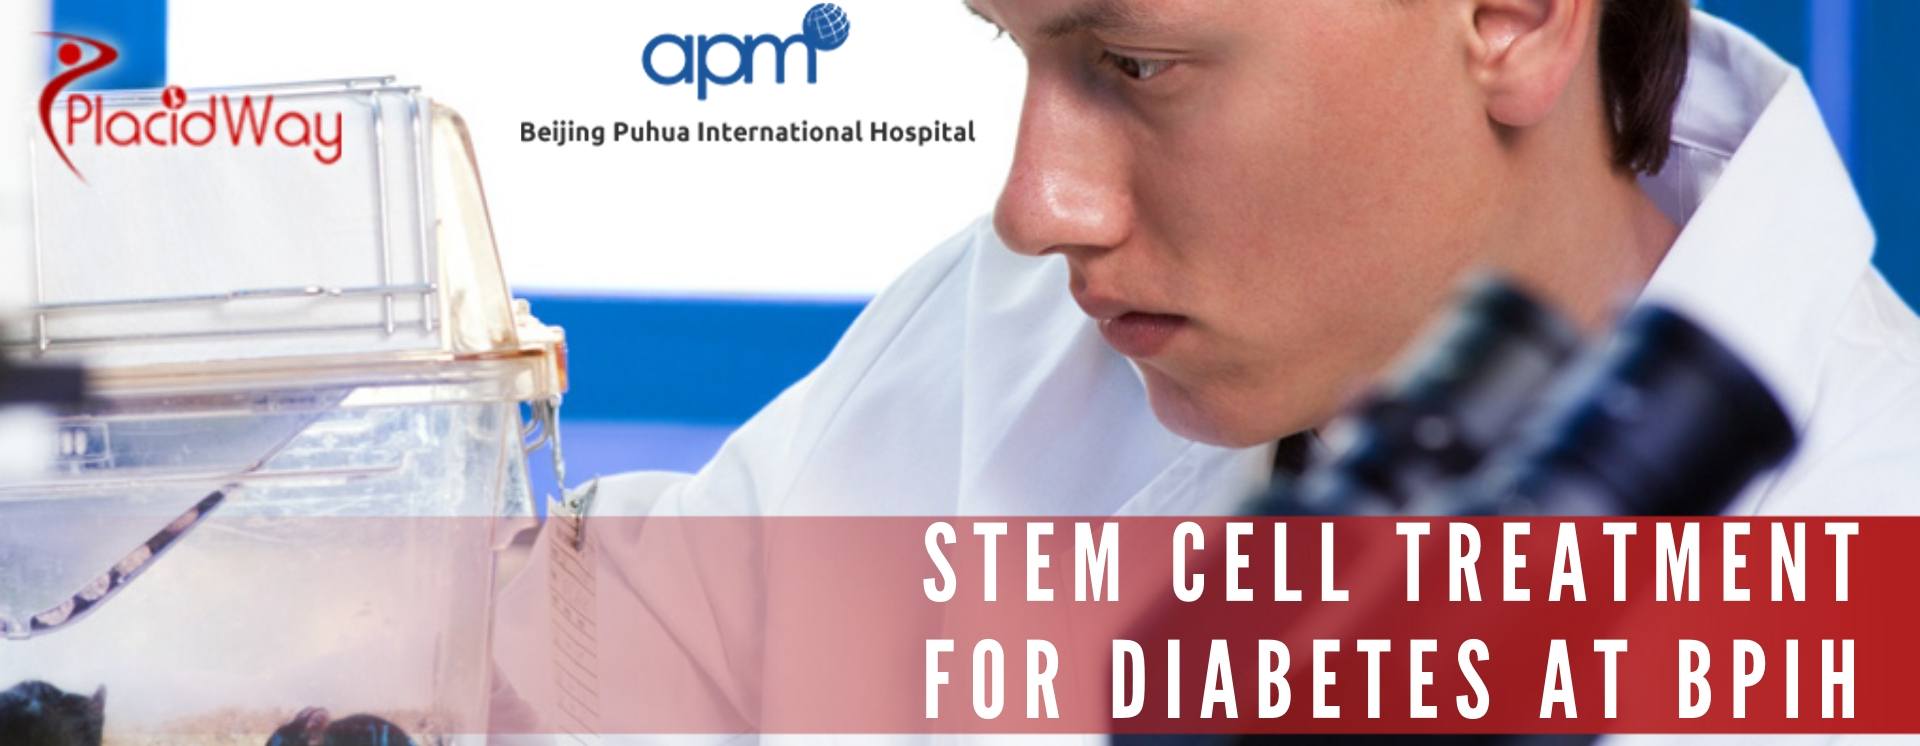 Stem Cell Treatment for Diabetes in Beijing, China